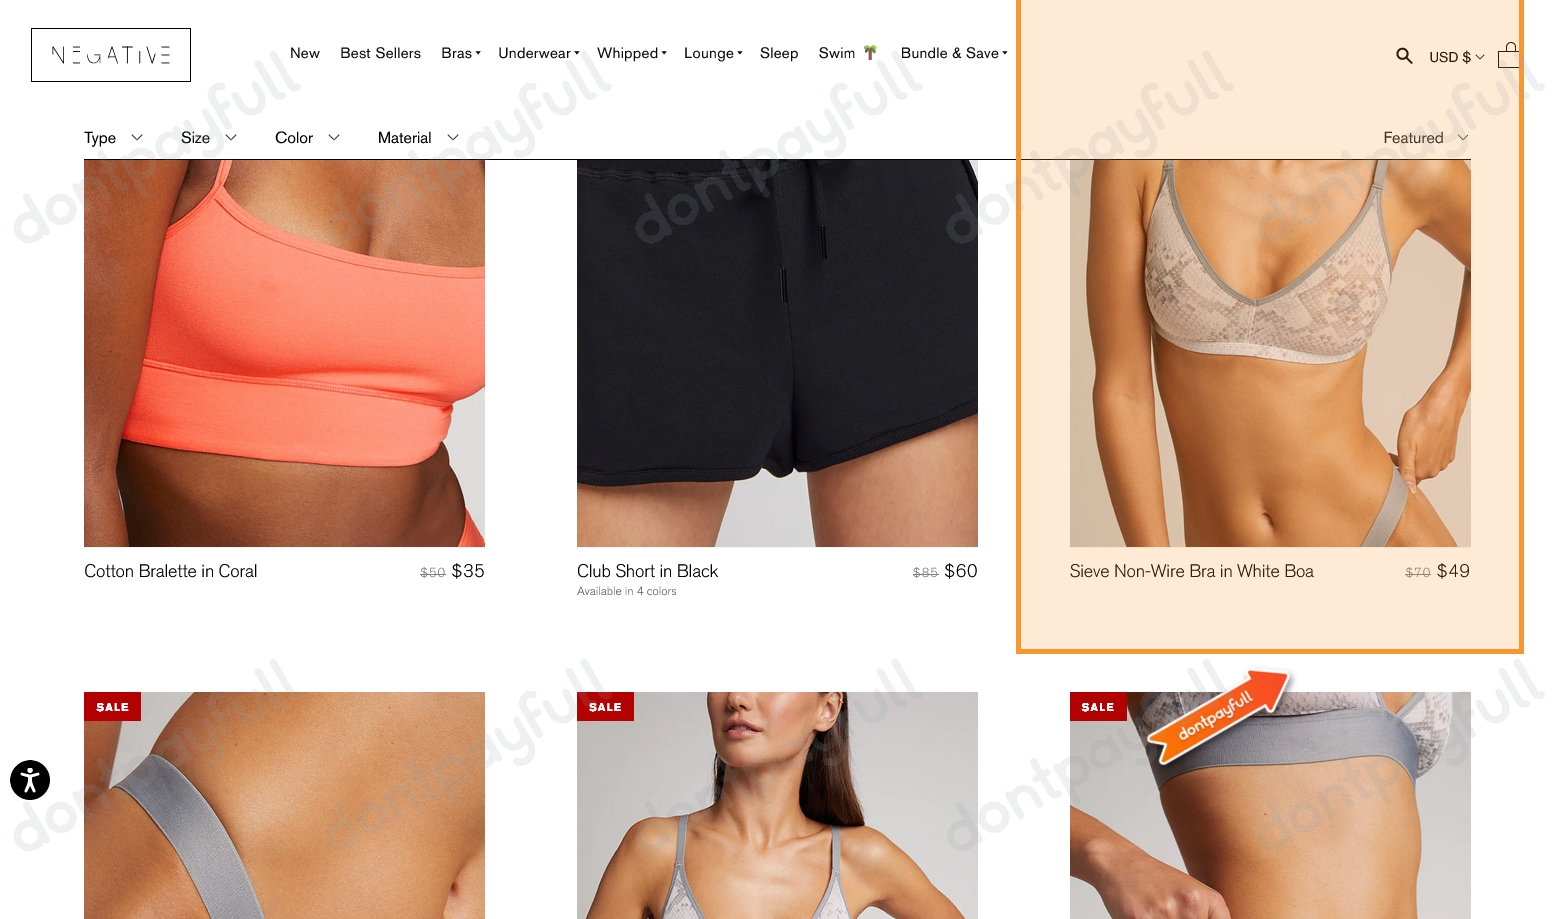 Does Negative Underwear support coupon stacking? — Knoji